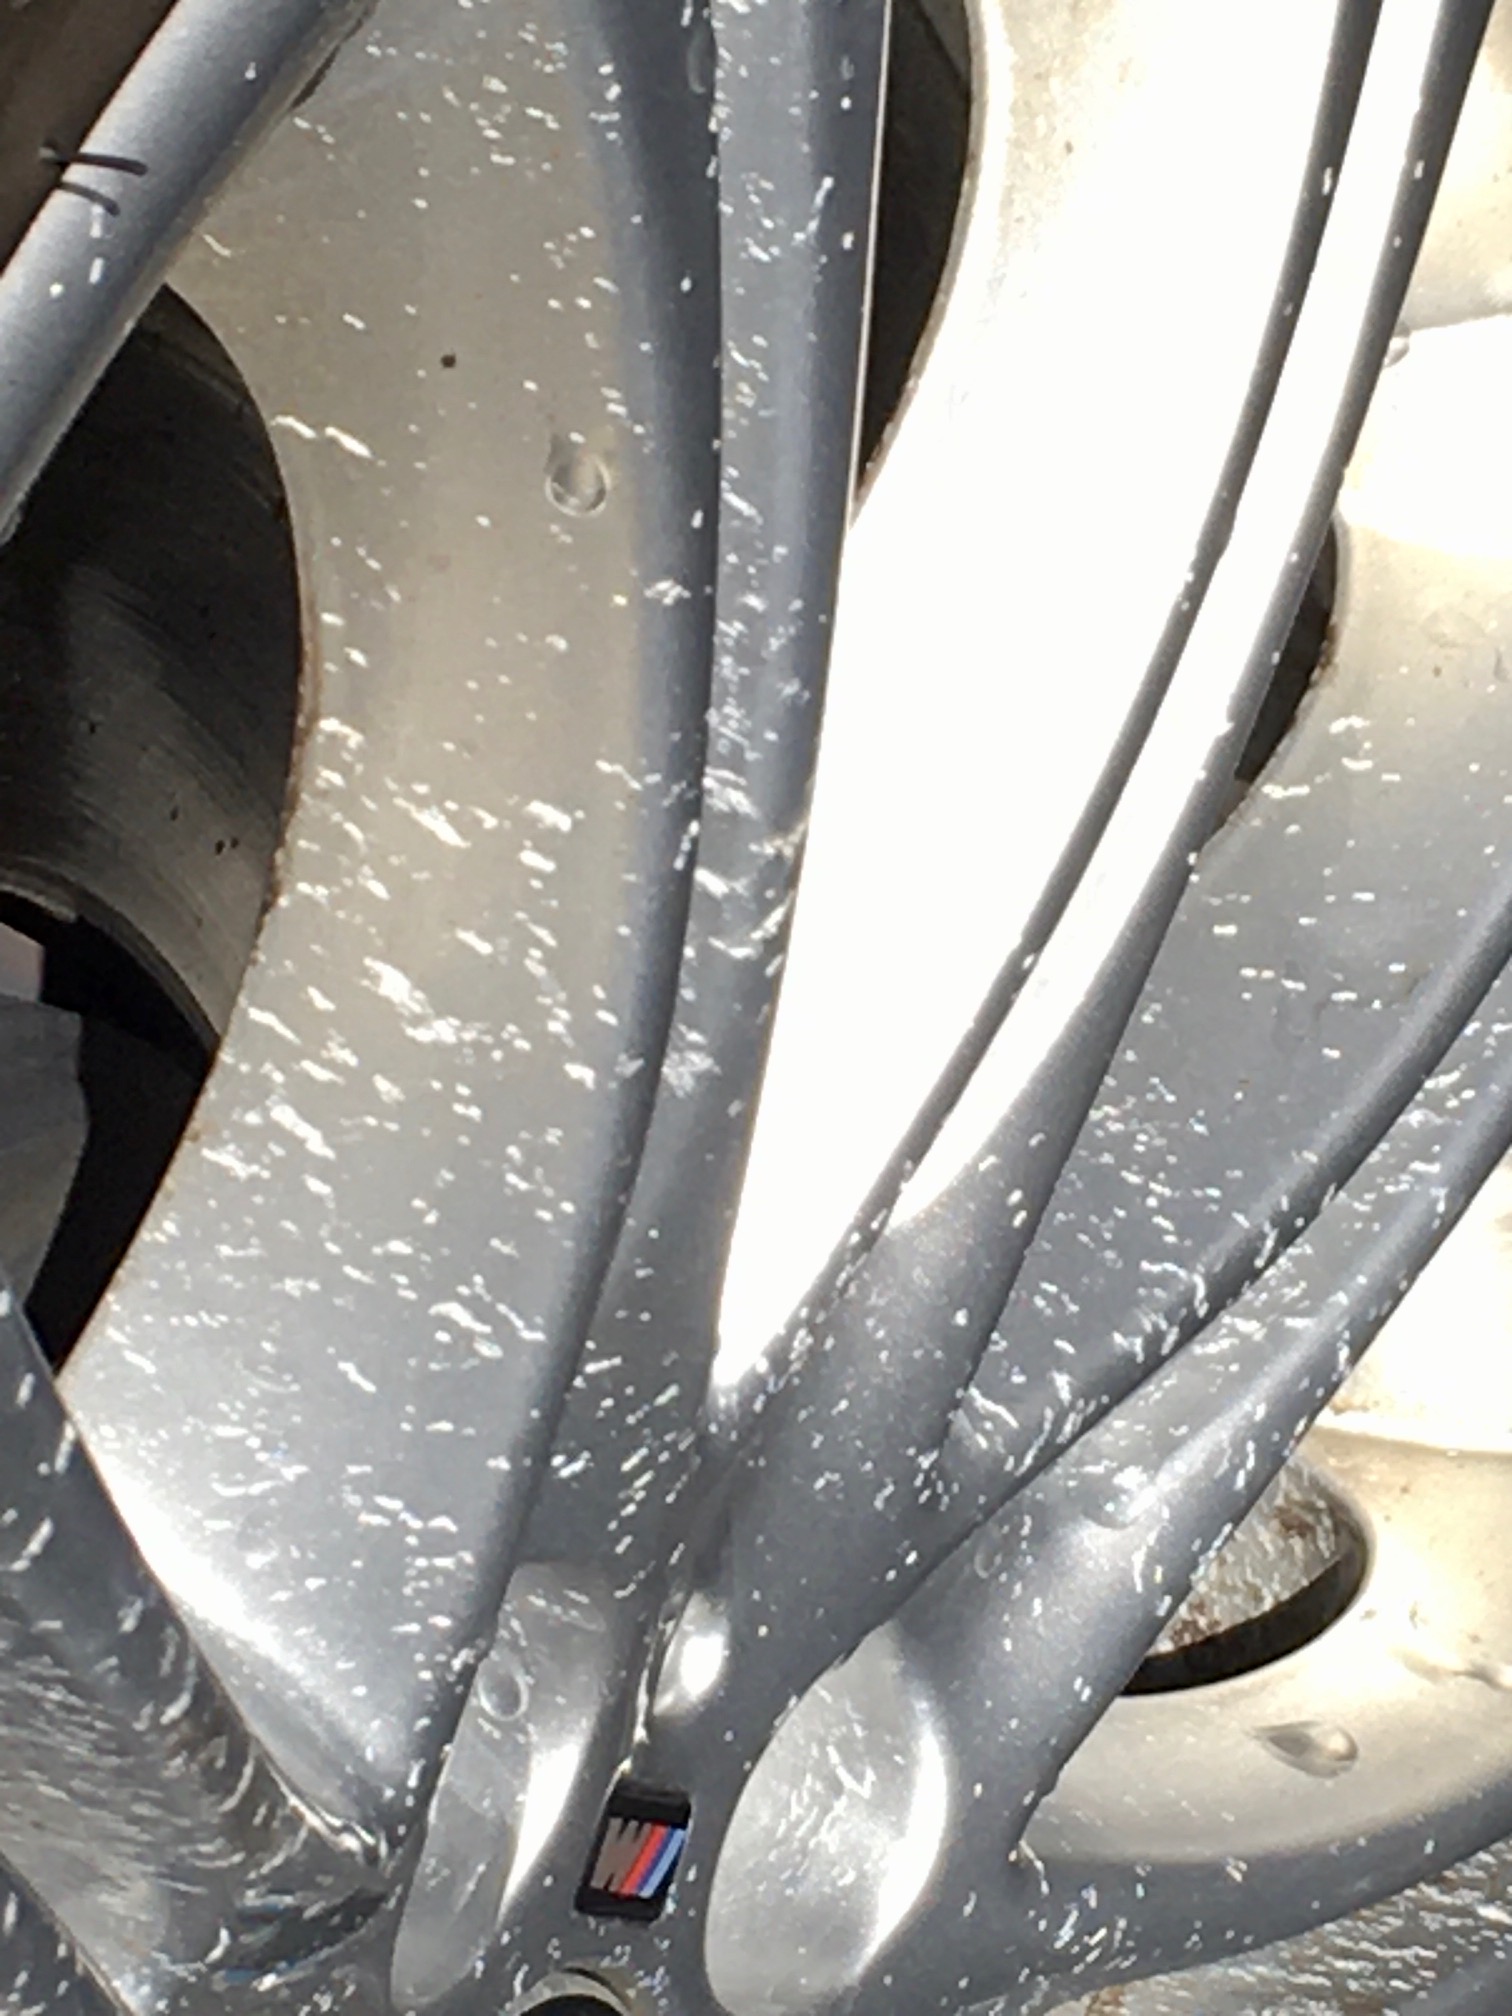 Re-Furbed Alloy Wheel Paint Issues - Page 1 - Bodywork & Detailing - PistonHeads